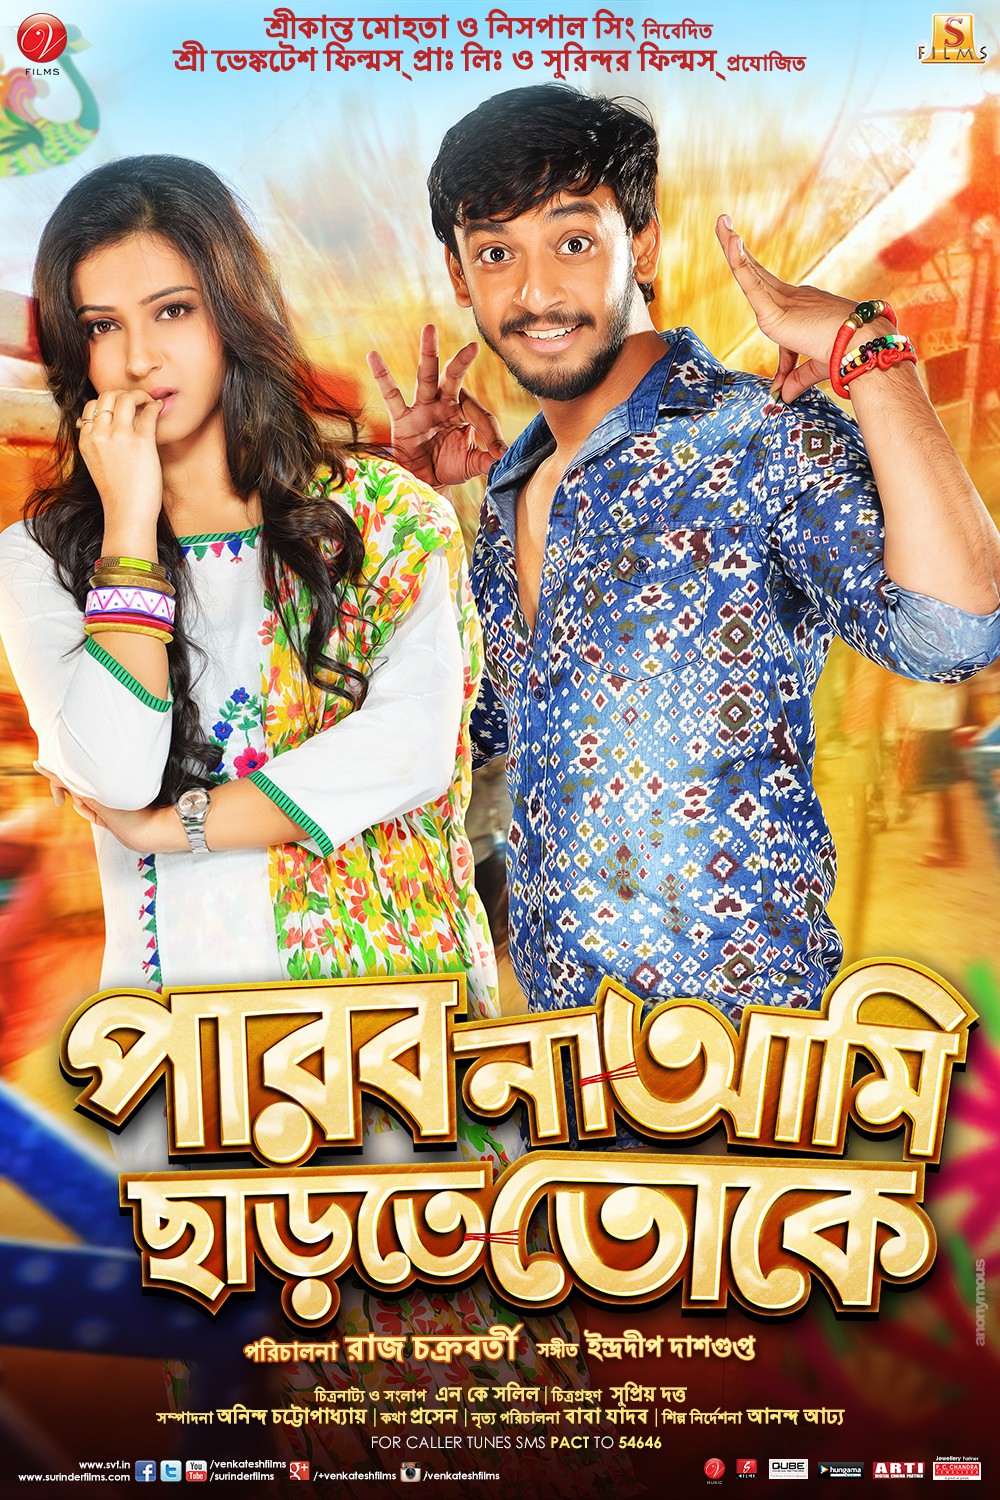 Extra Large Movie Poster Image for Parbona Ami Chartey Tokey (#3 of 5)